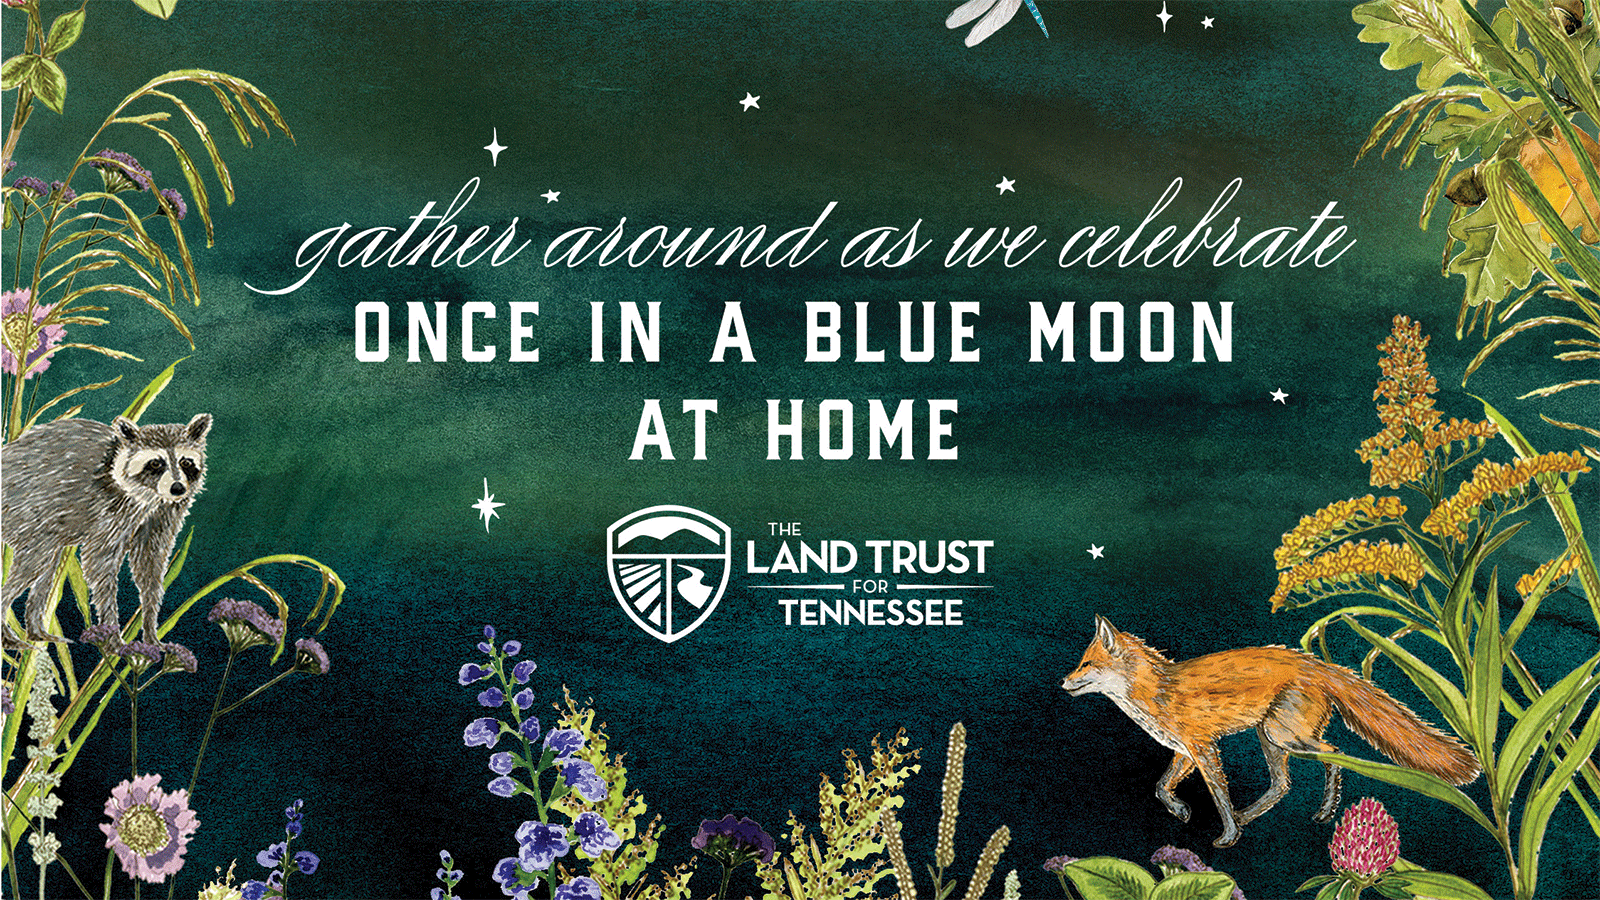 Once in a Blue Moon The Land Trust For Tennessee The Land Trust For